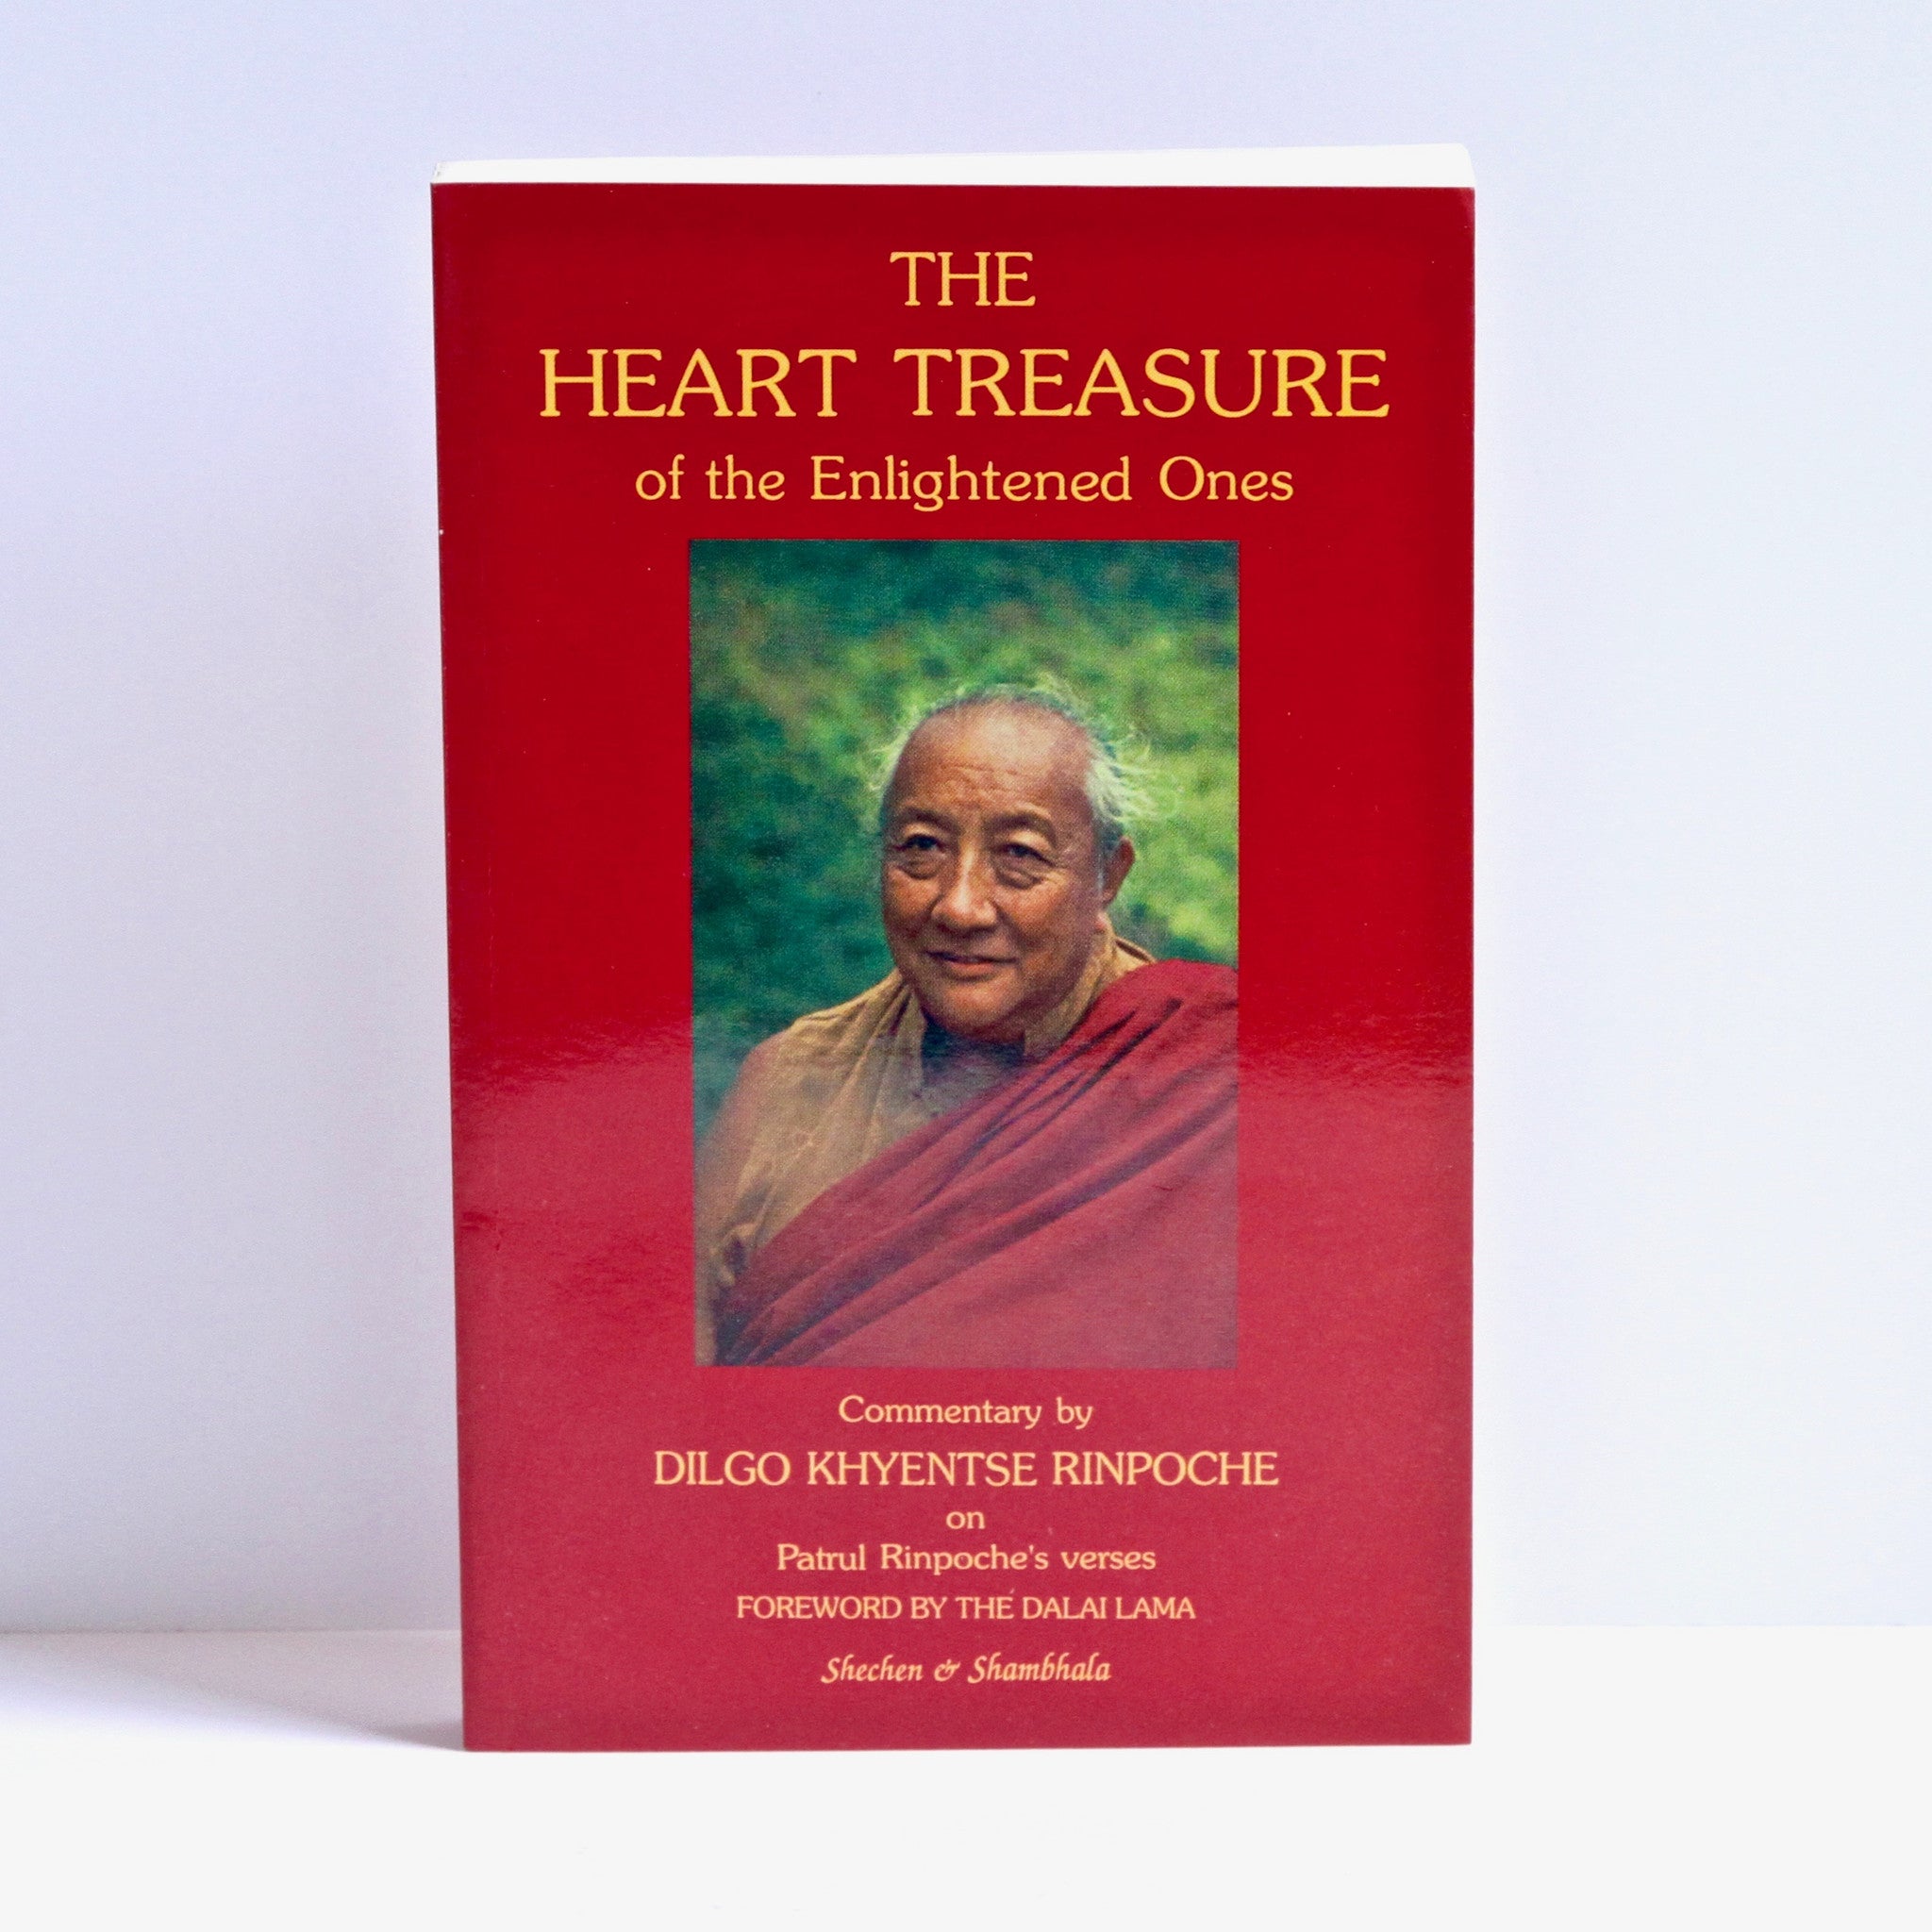 The Heart Treasure of the Enlightened Ones - Commentary by Dilgo Khyentse Rinpoche